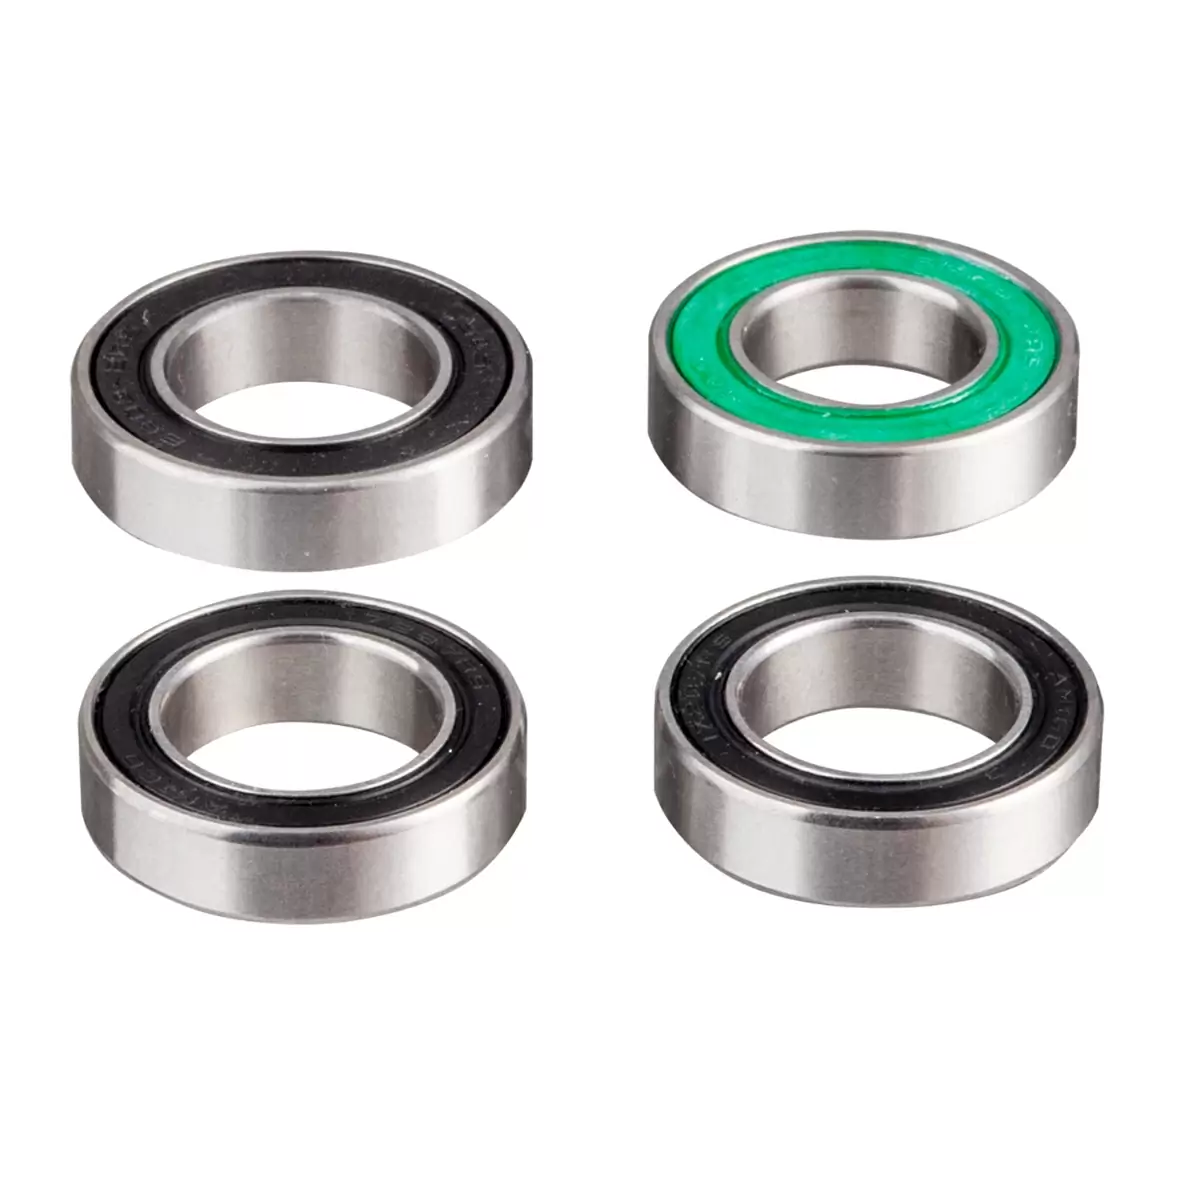 Replacement bearing kit for Hex HG / HGR rear hubs - image